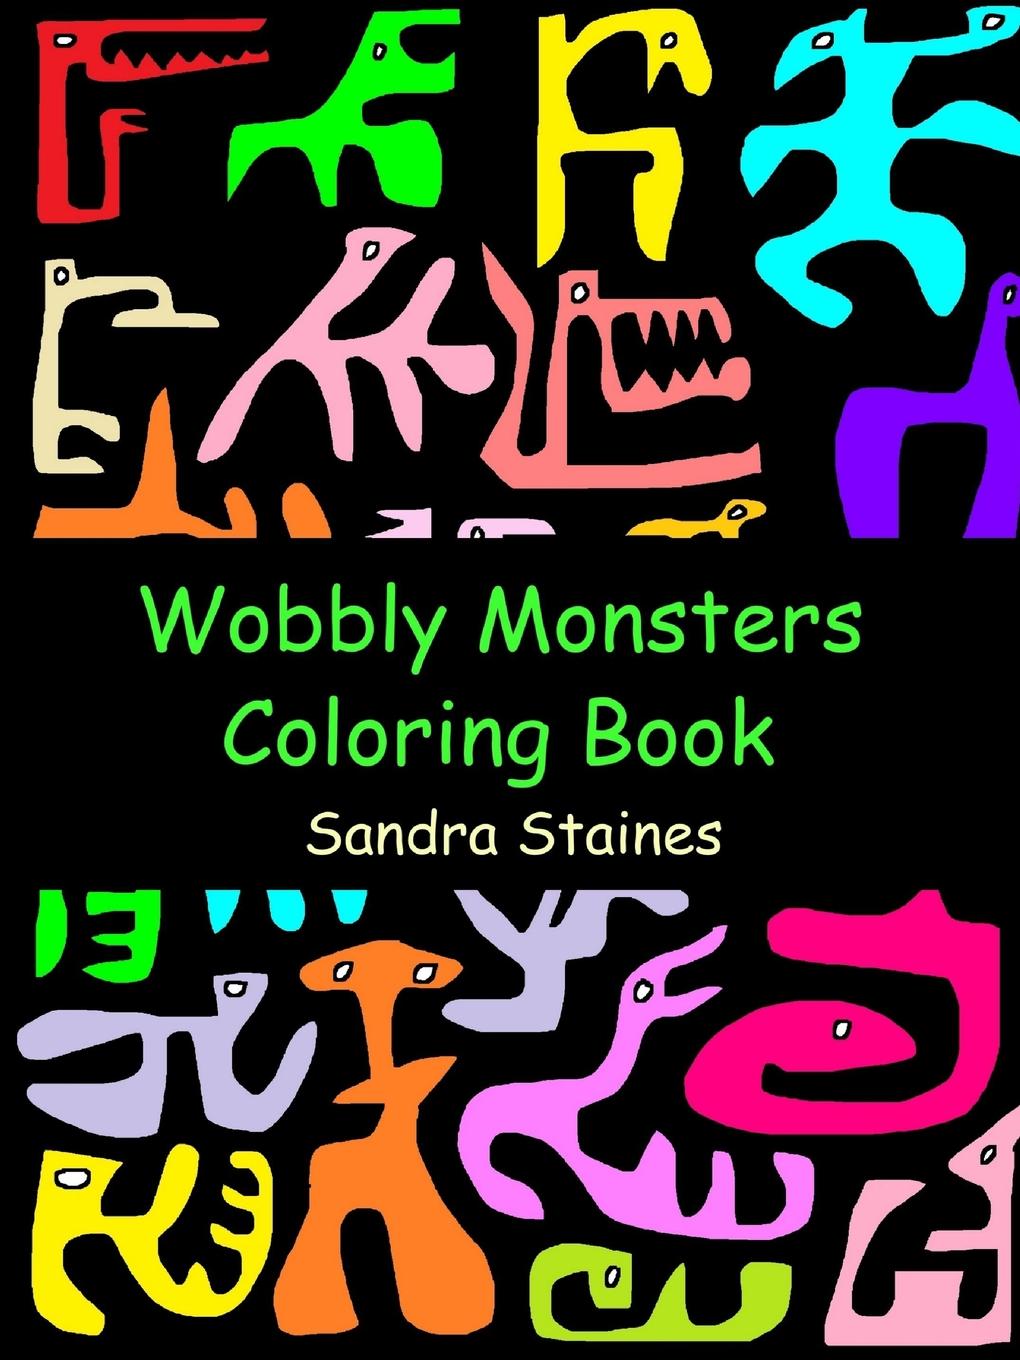 Sandra Staines Wobbly Monsters Coloring Book